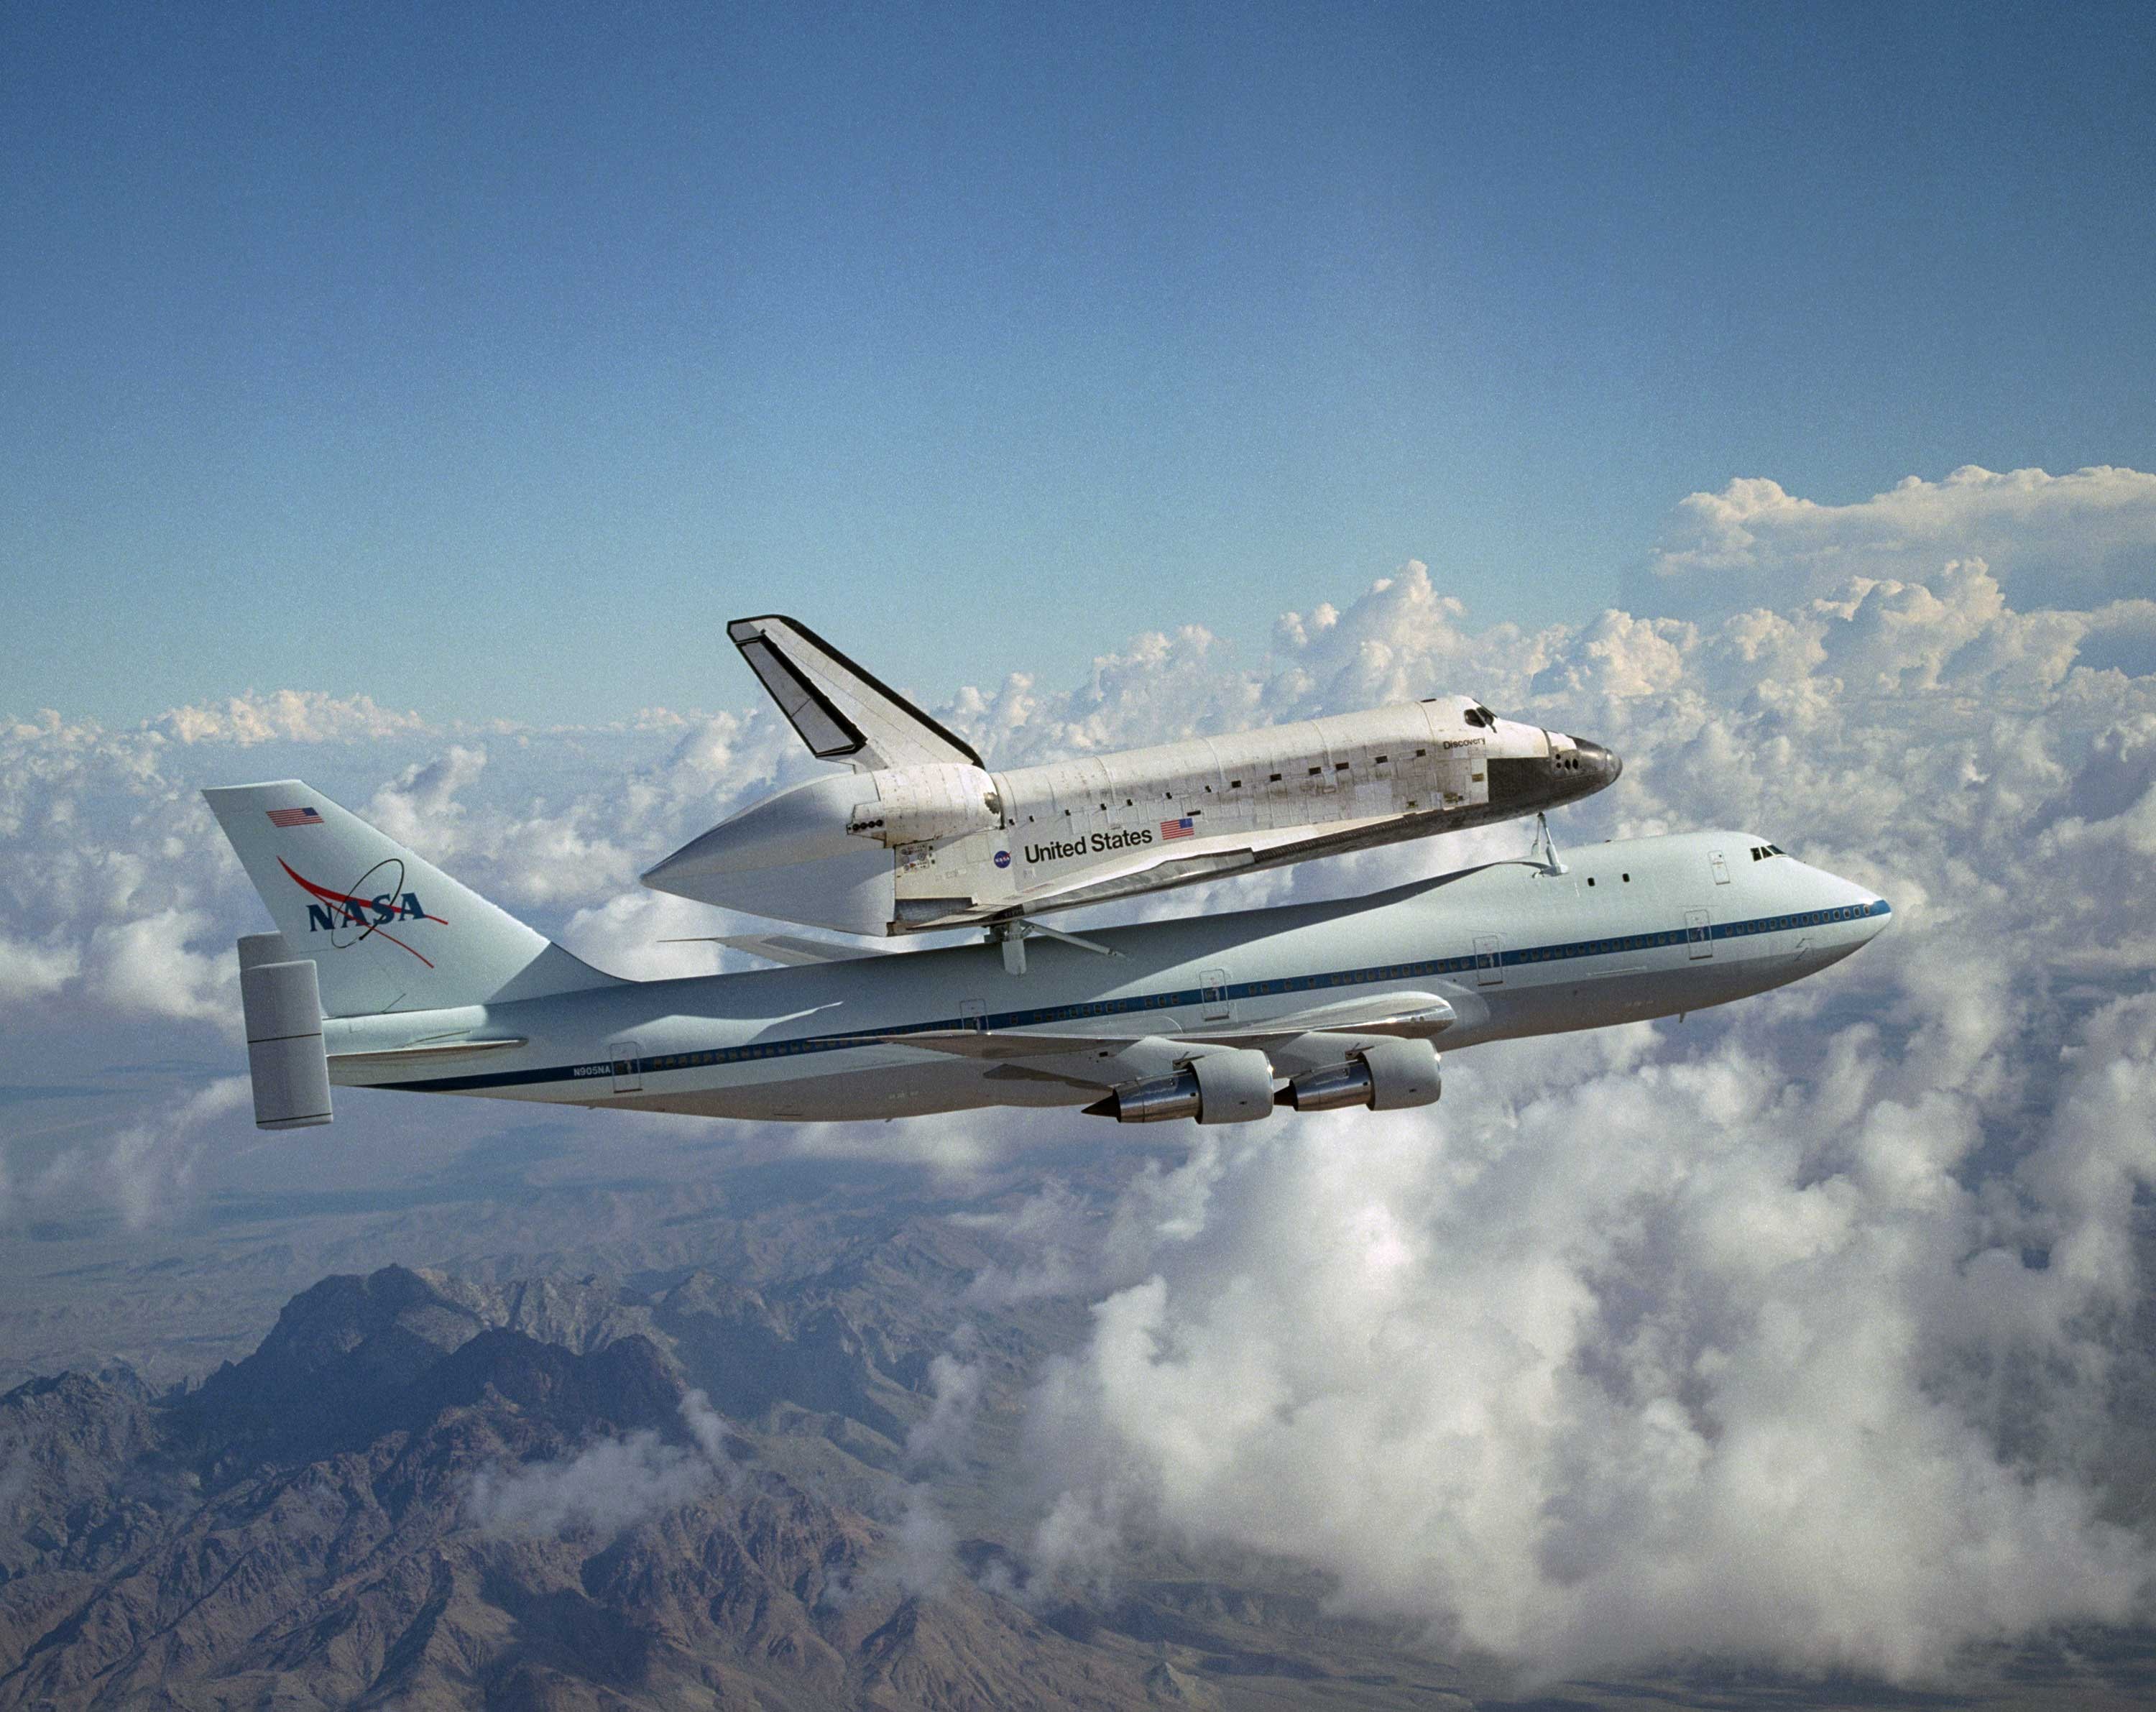 white nasa airliner and white and black space shuttle